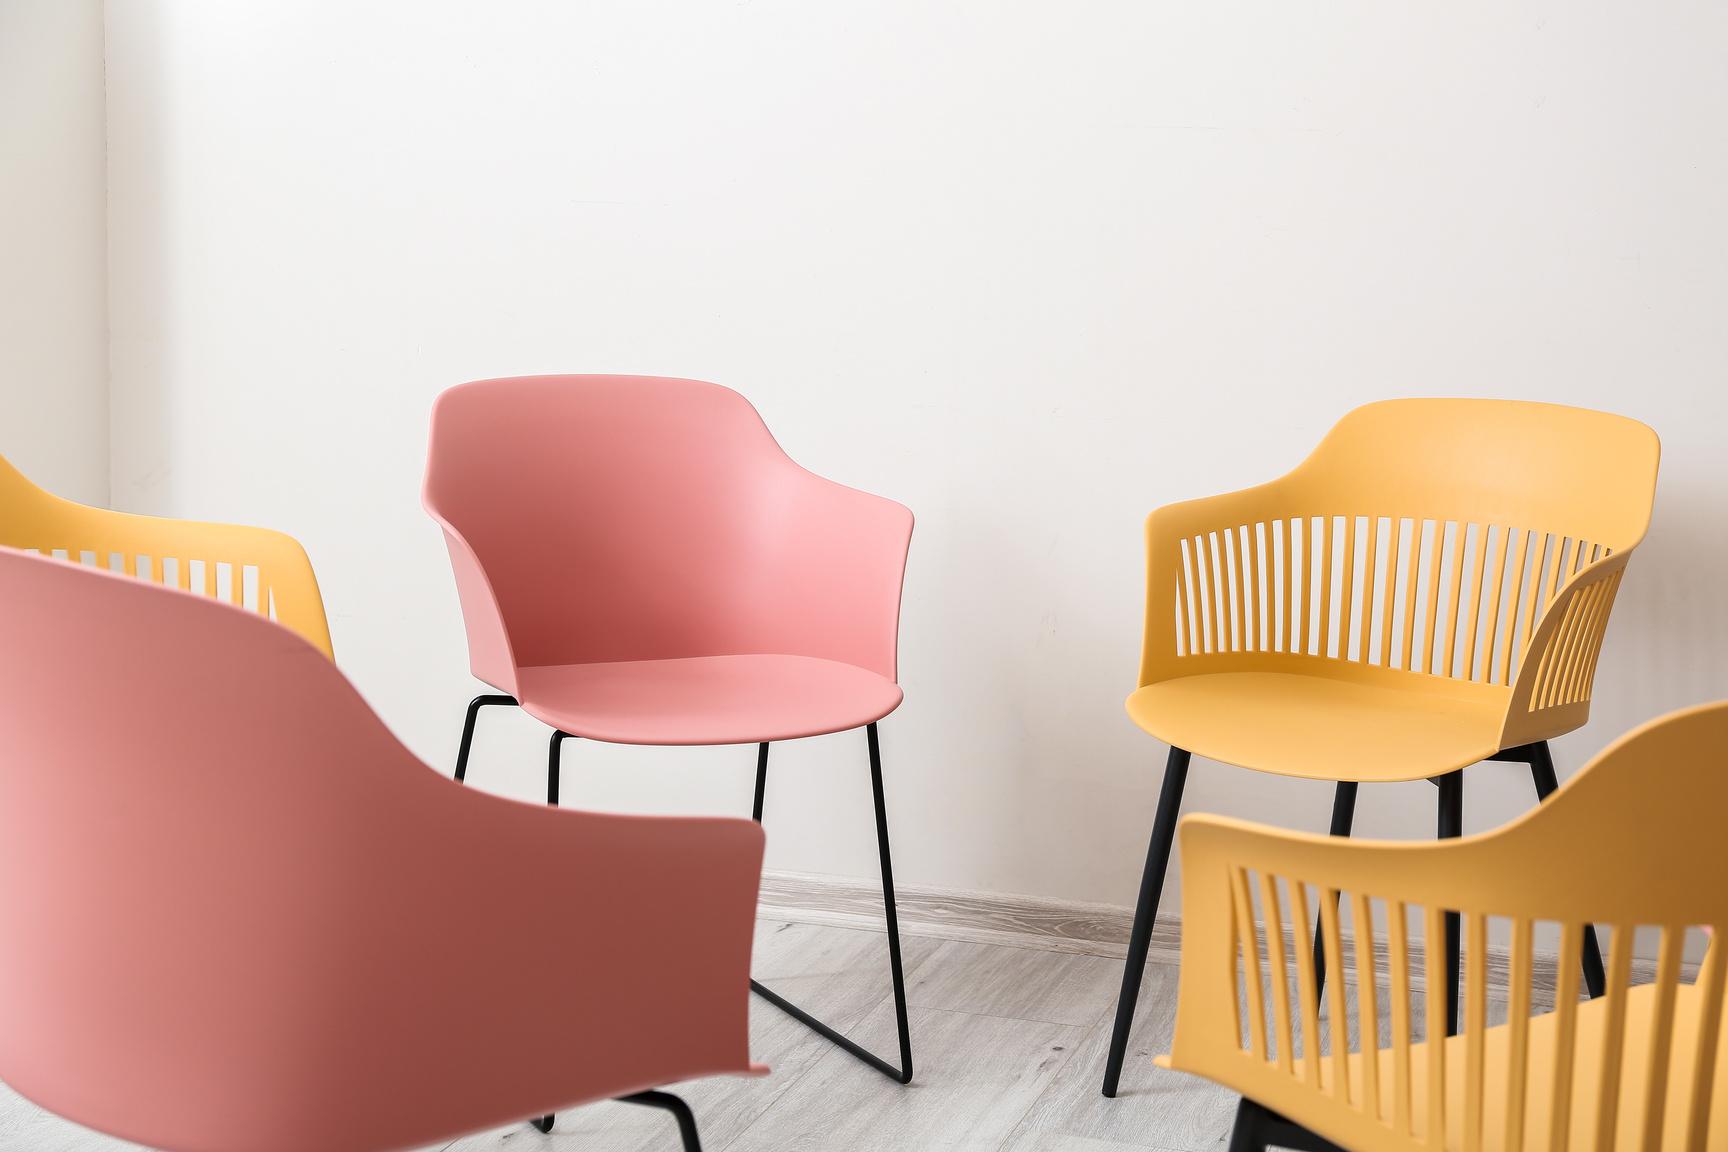 Empty Chairs Prepared for Group Therapy in Psychologist's Office